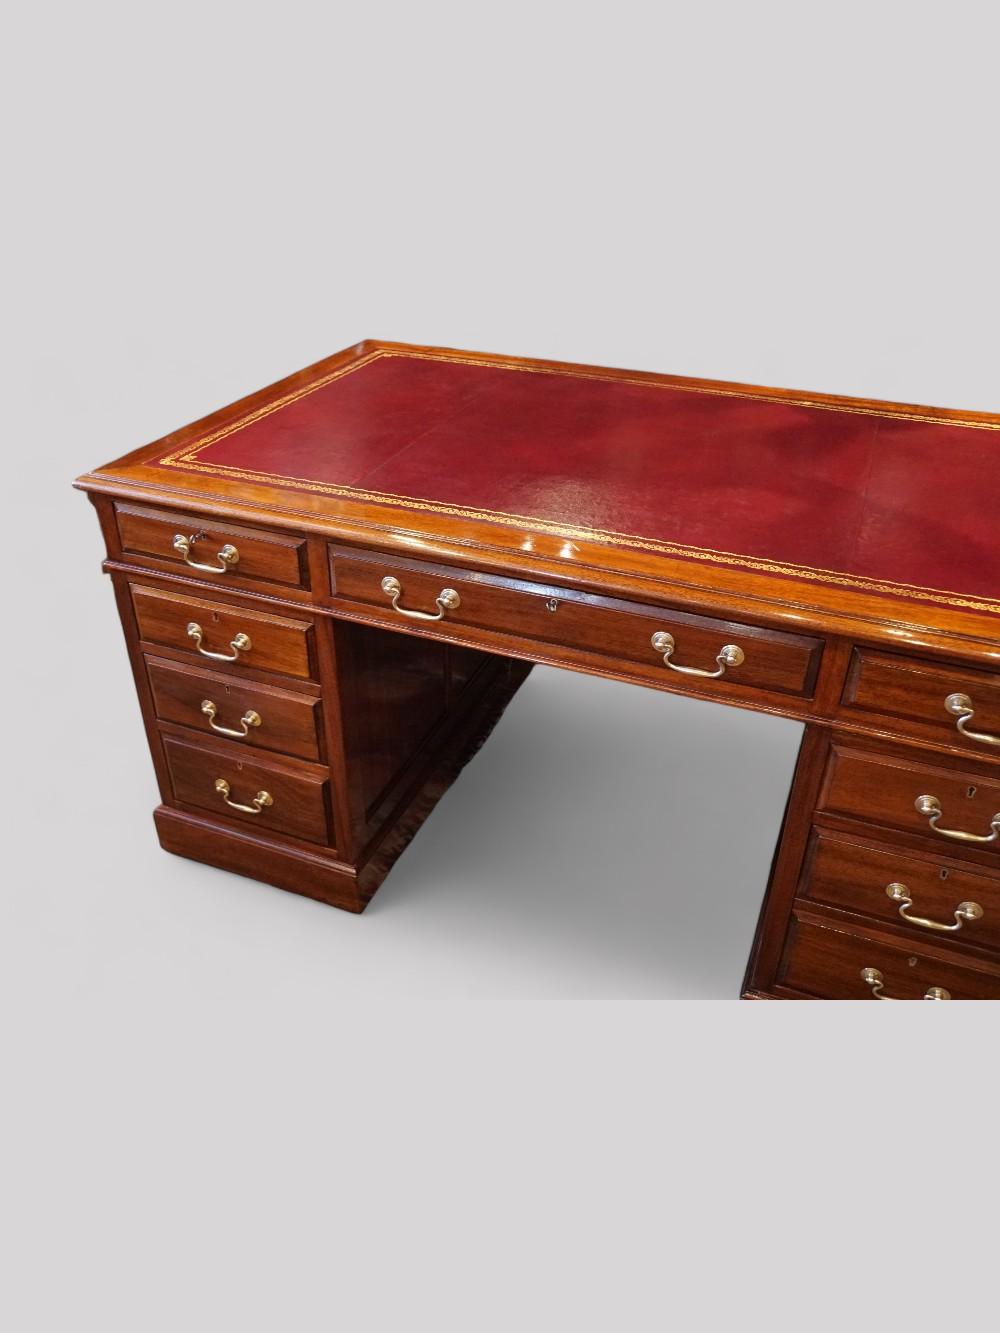 Edwardian mahogany pedestal desk 153cms
This Edwardian mahogany pedestal desk was made circa 1910 and is of a good large size.
The pedestal desk is made in 3 parts, this is for ease of transportation to and around your home.
It has the usual drawer